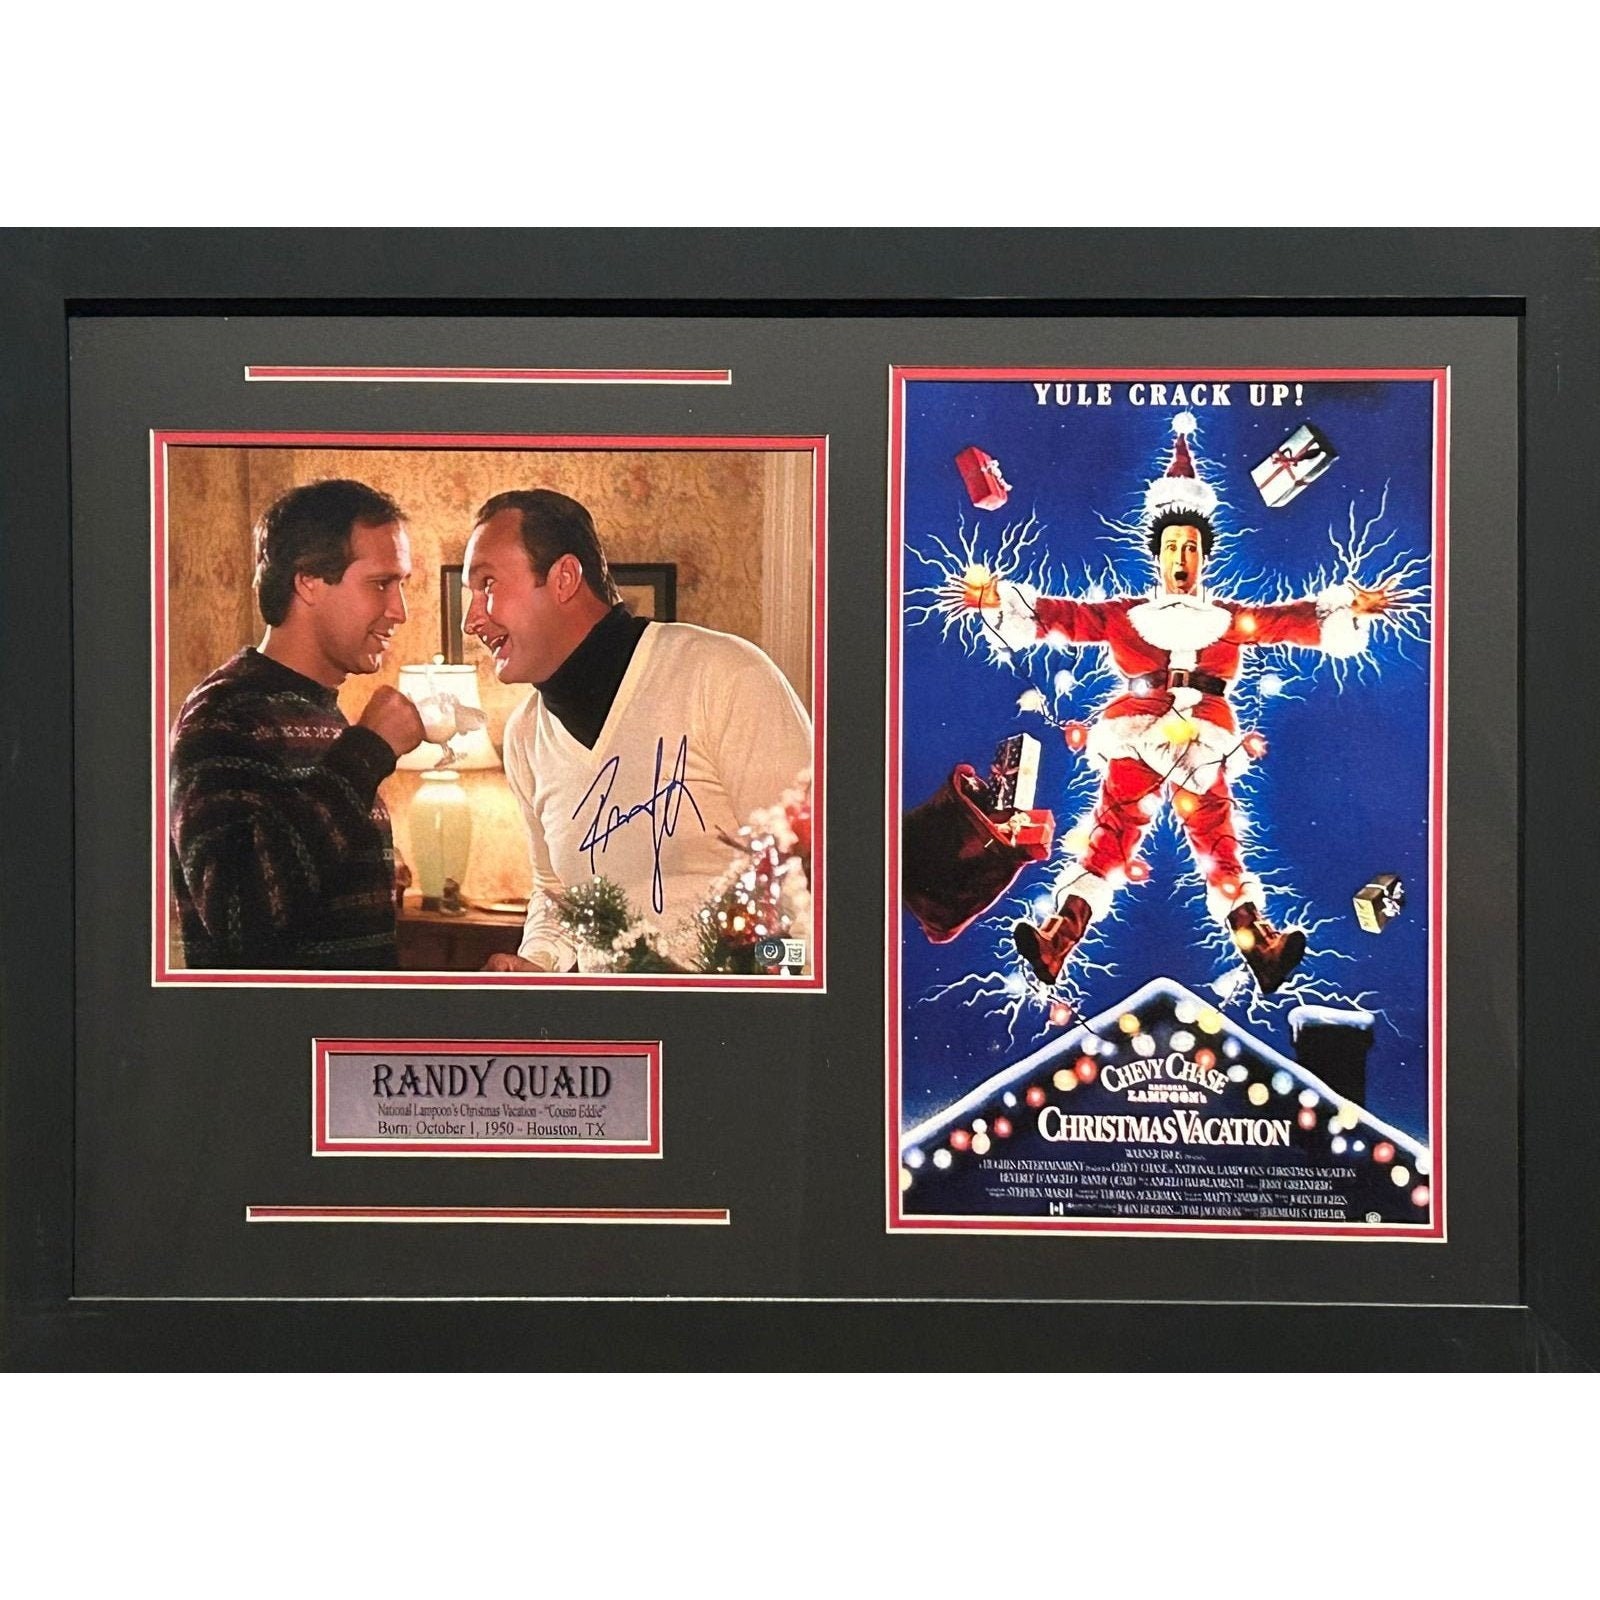 Chevy Chase Signed Framed Jersey Beckett Griswold Christmas Vacation